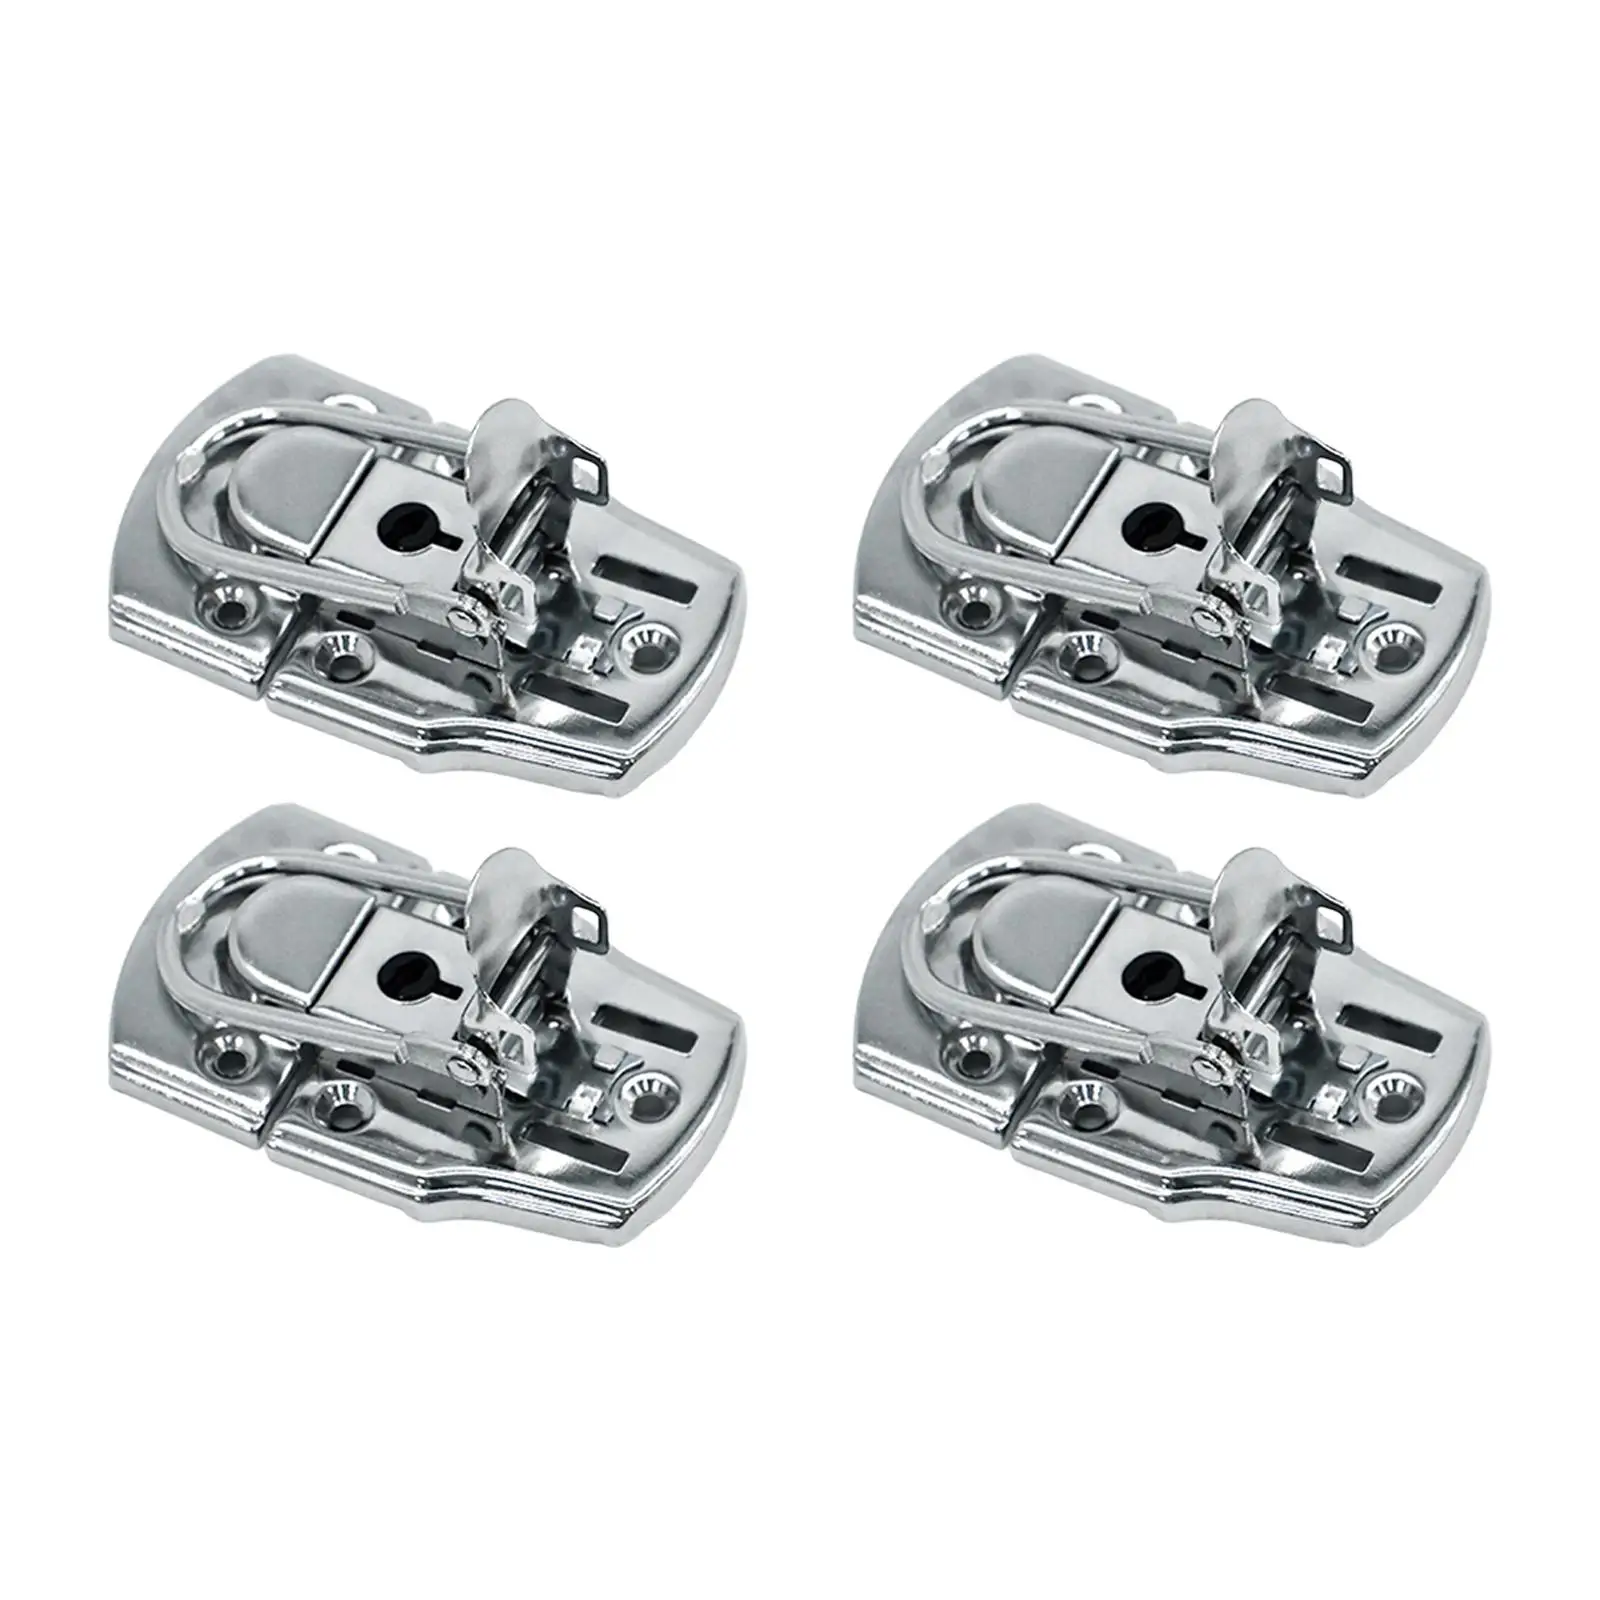 4x Toggle Hasp Latch Vintage Accessory for Wooden Box Tool Box Trinket Box